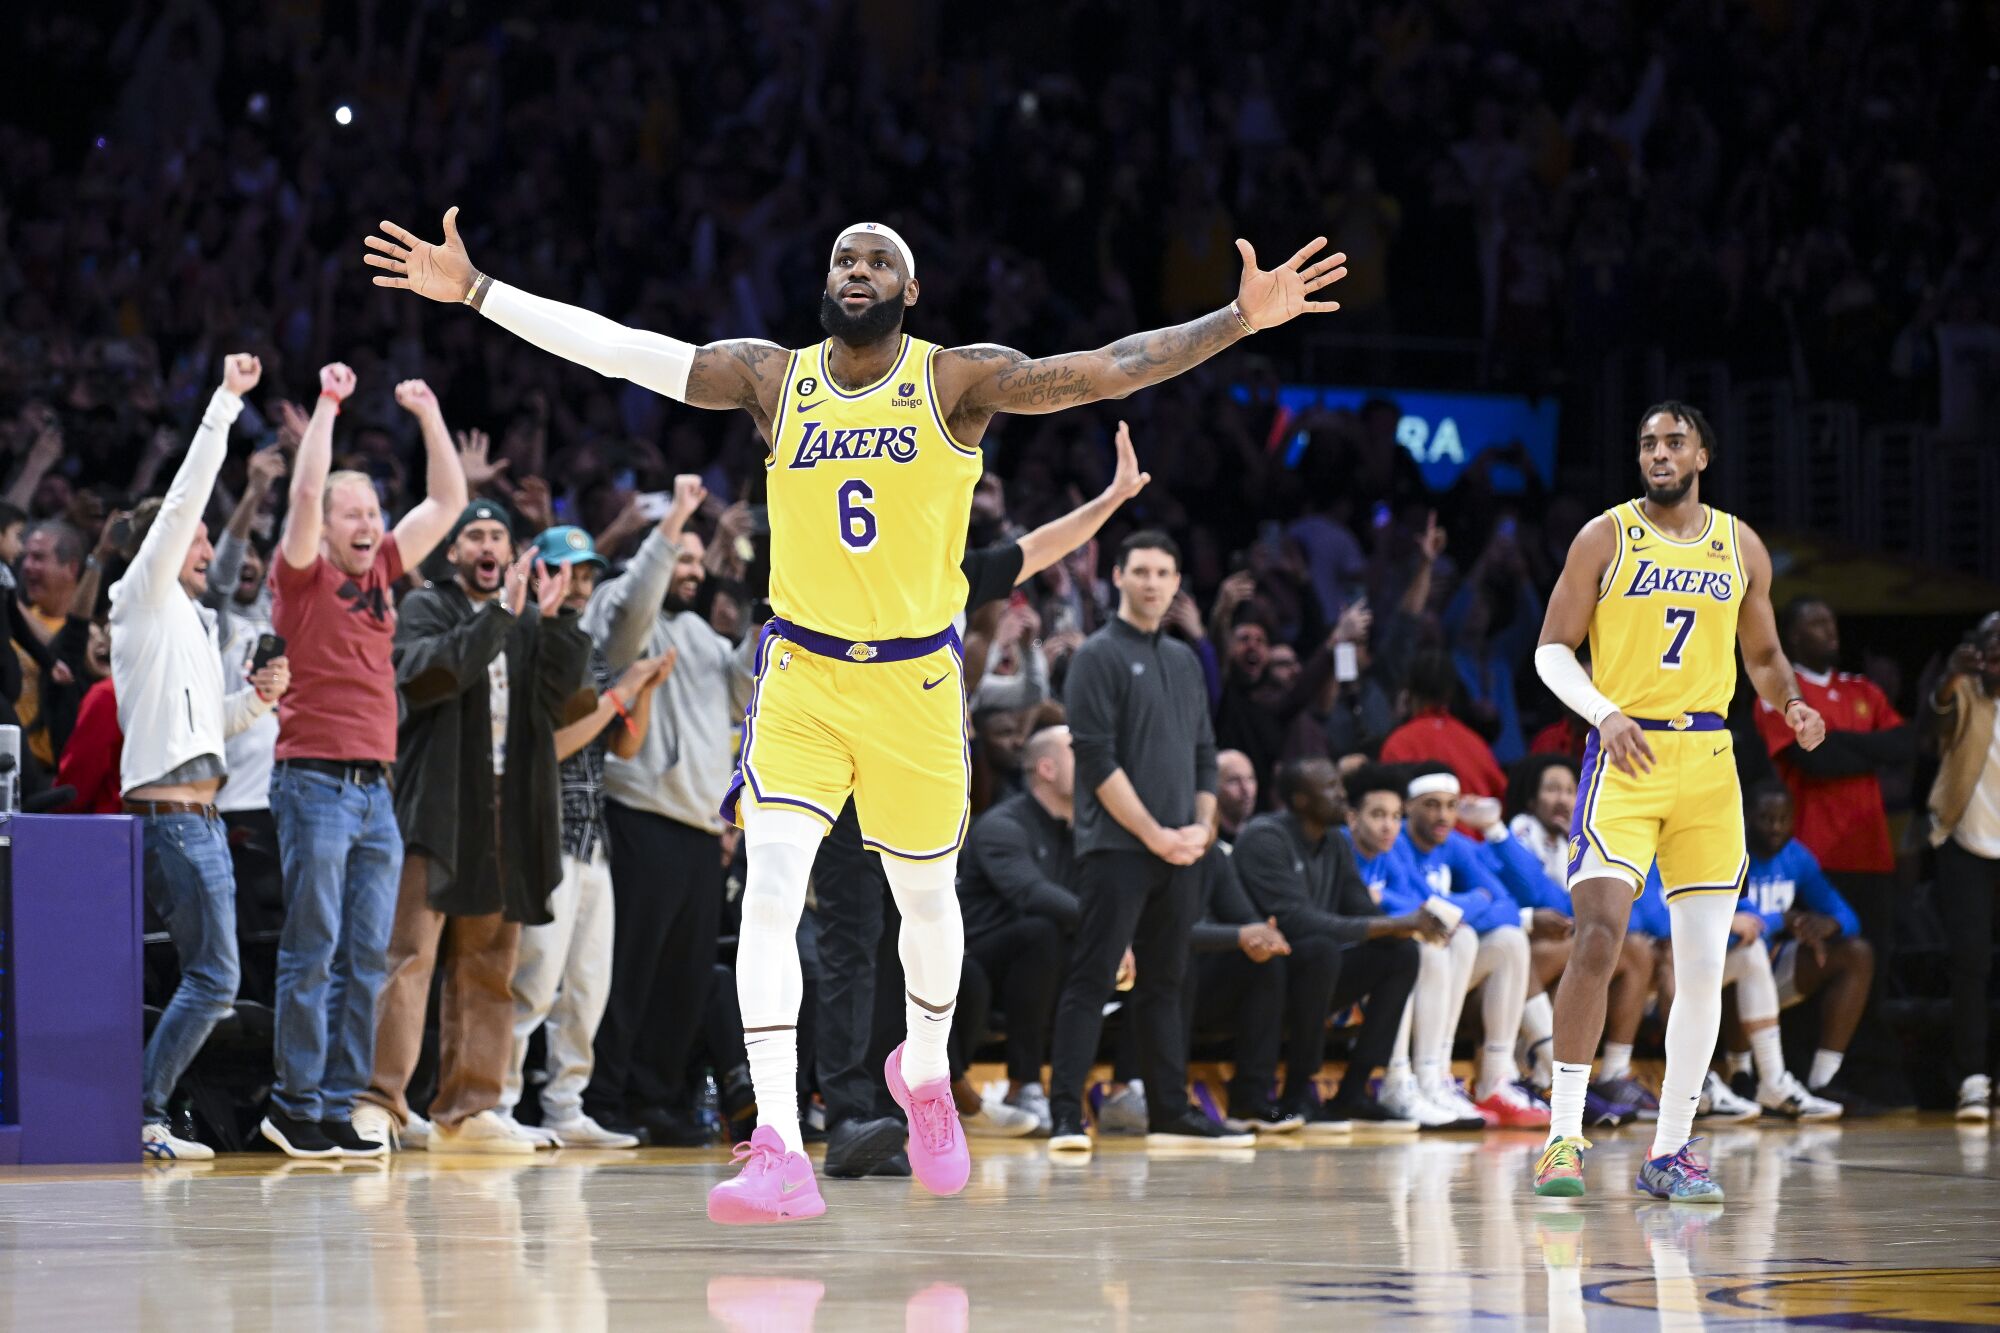 LeBron James and fans standing courtside celebrate after he made the shot to become the NBA's all-time scoring leader.